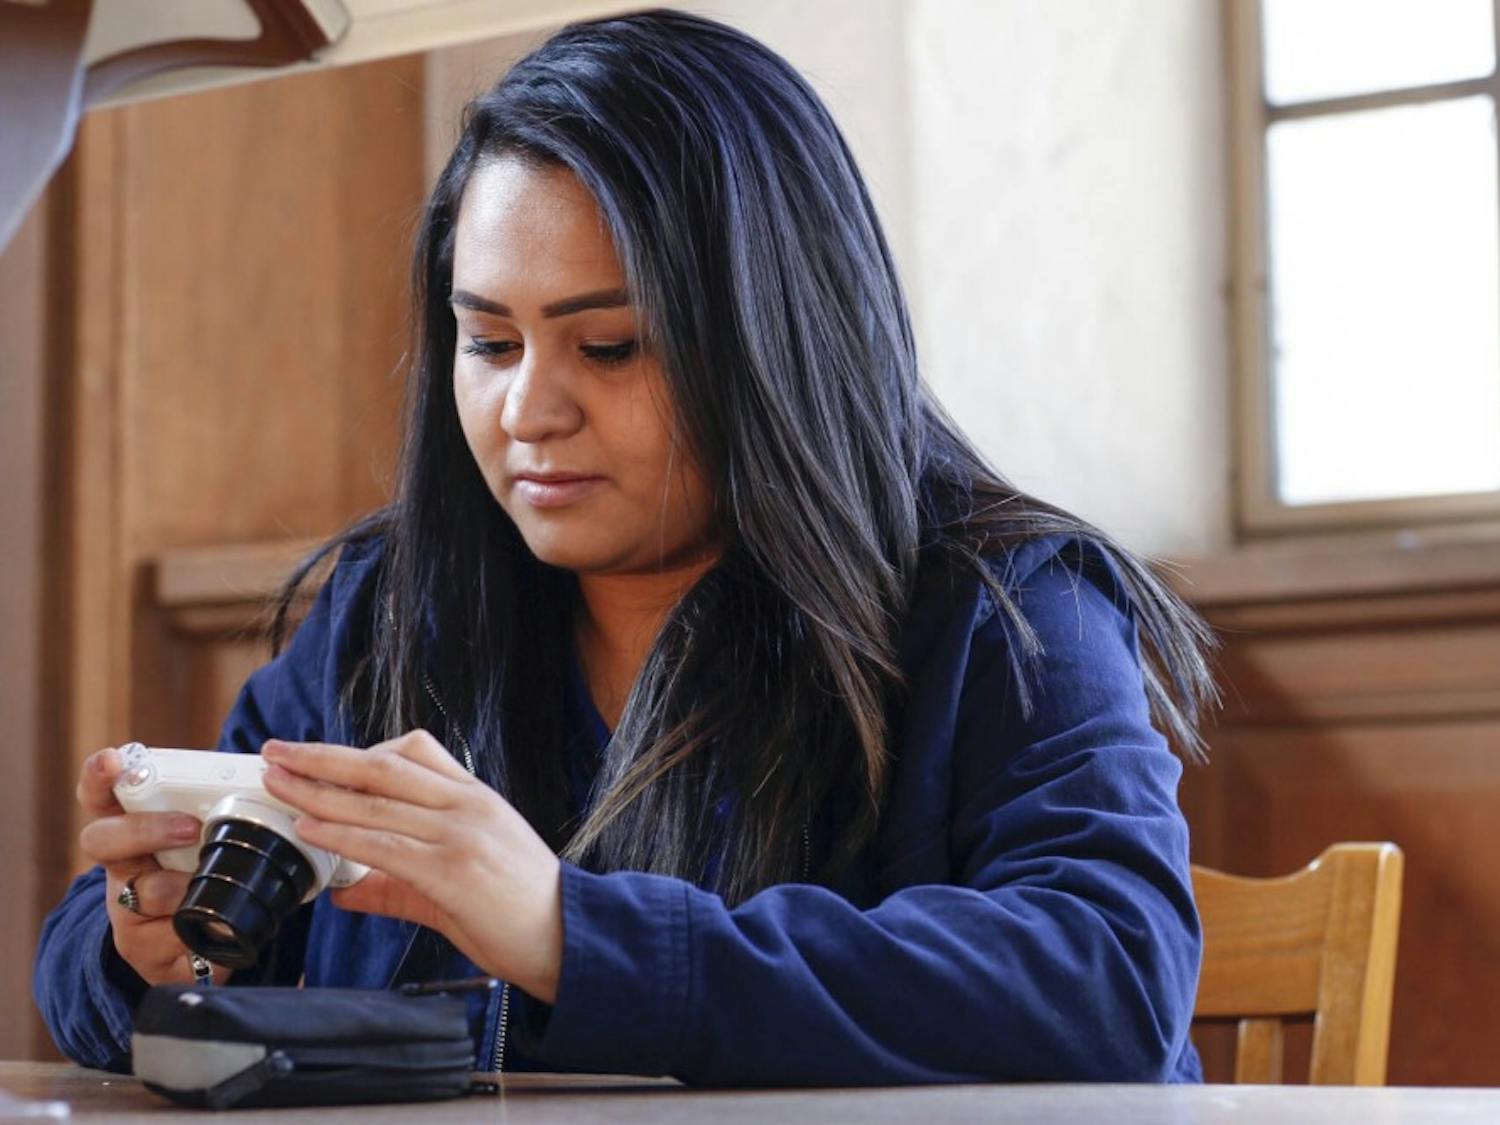 Vanessa Espinoza works on her camera at Zimmerman Library on Dec. 9, 2017. Vanessa is a mass communication and journalism major from El Paso, Texas and will be graduating this Fall.